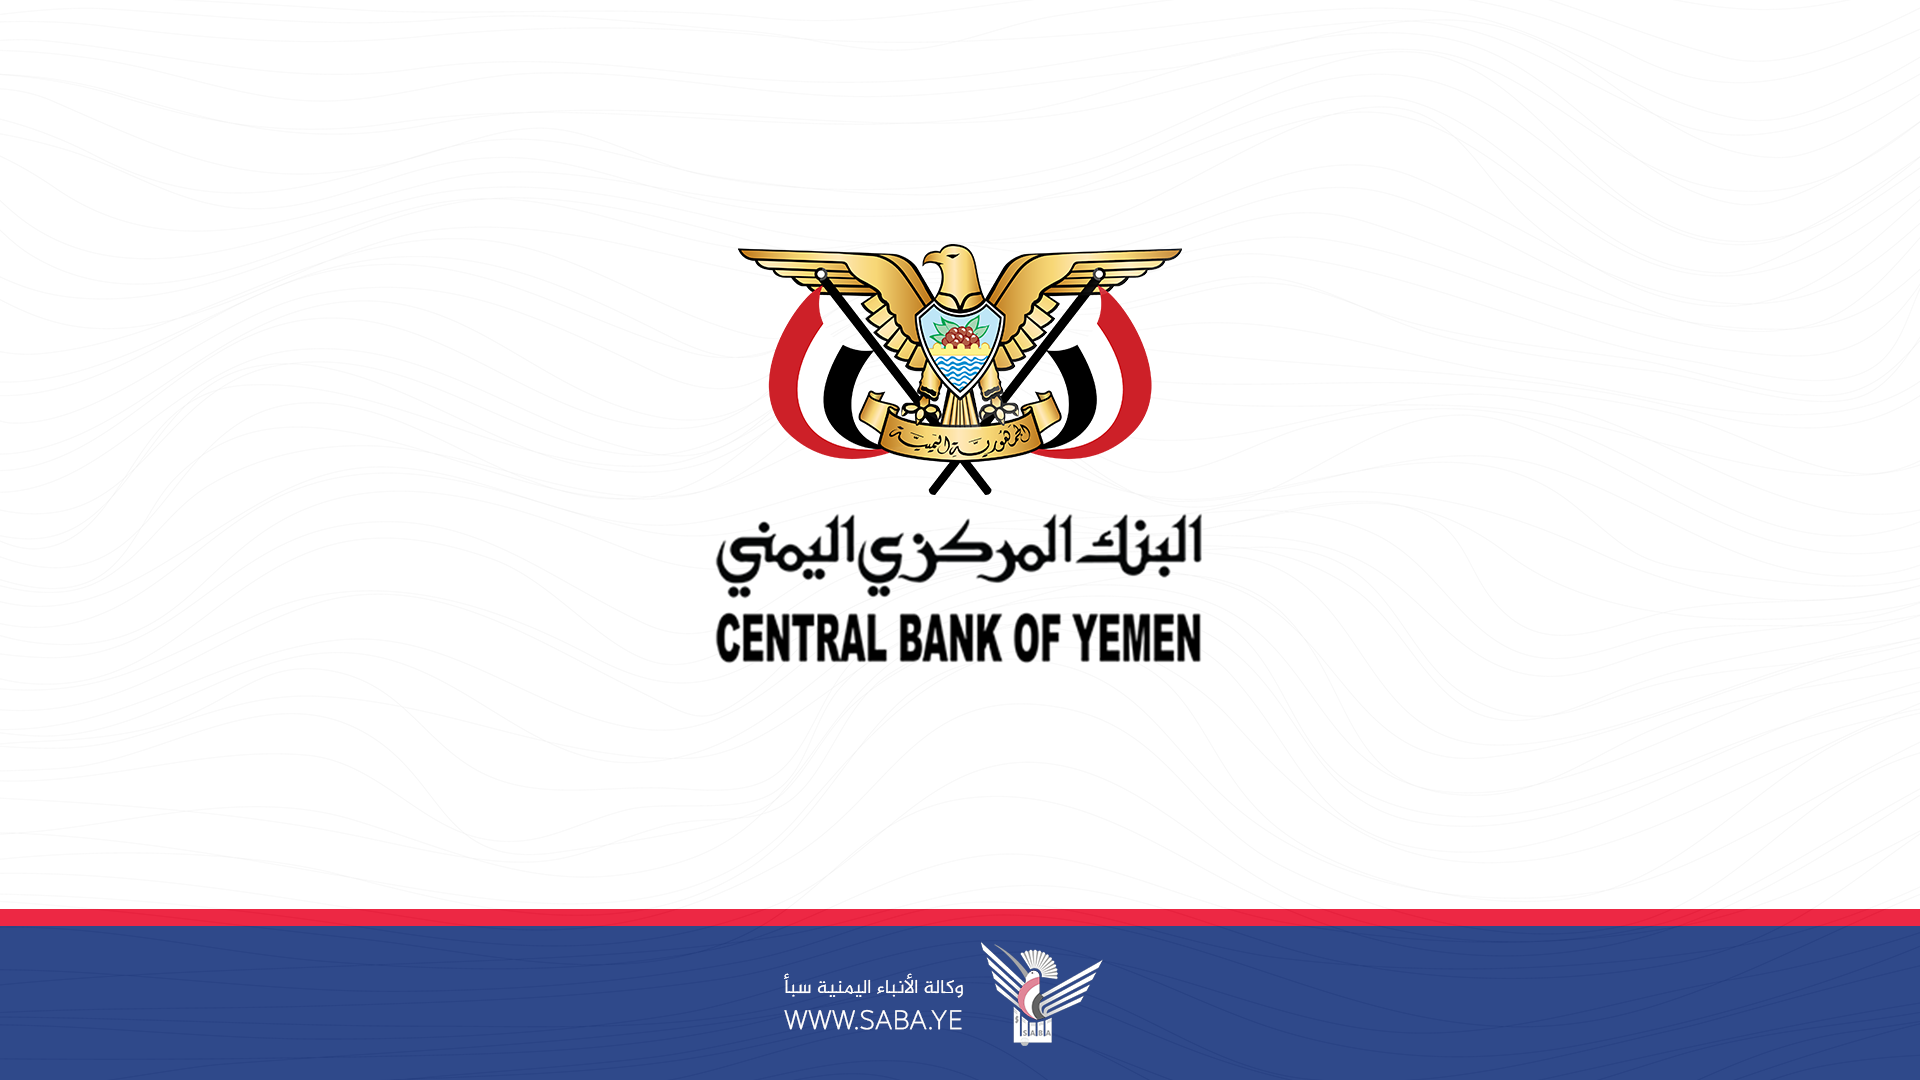 Yemen's Central Bank issues important statement